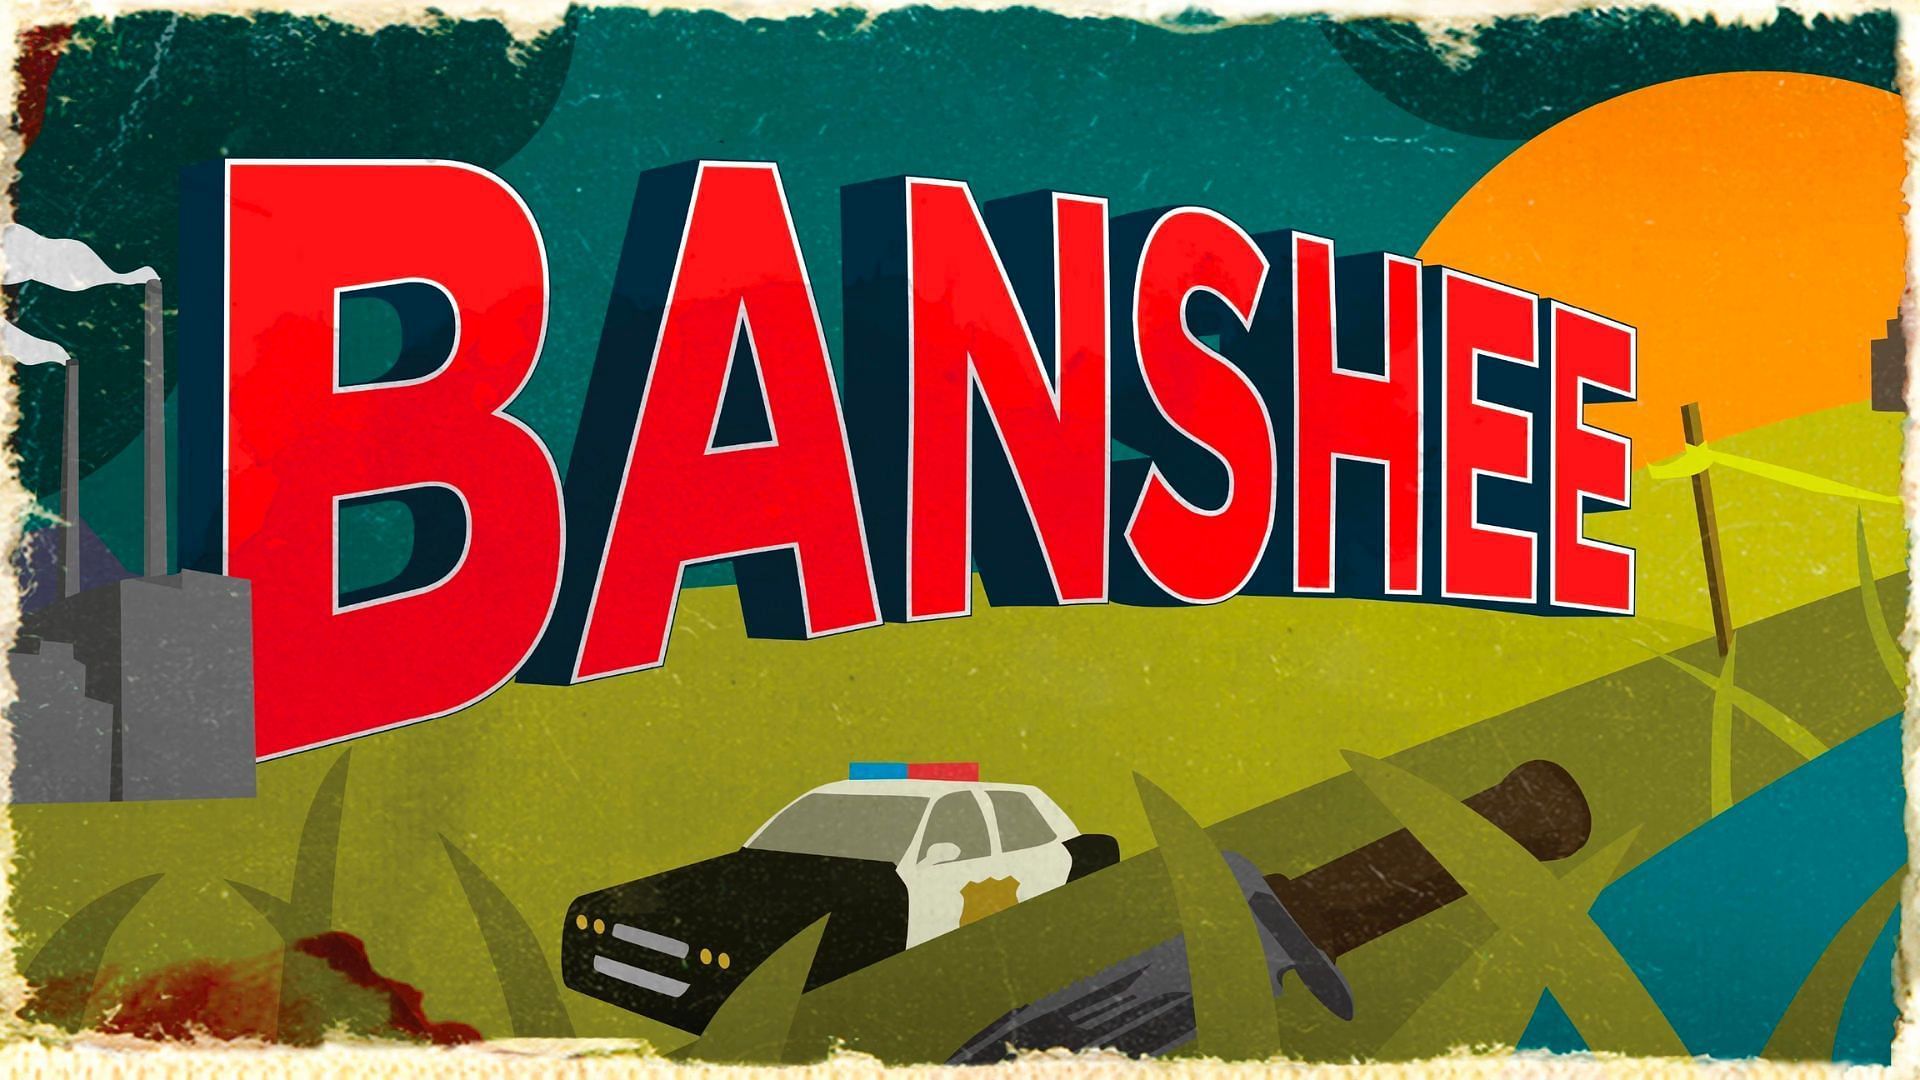 Banshee is about crime going down in a small town (Image via Max)